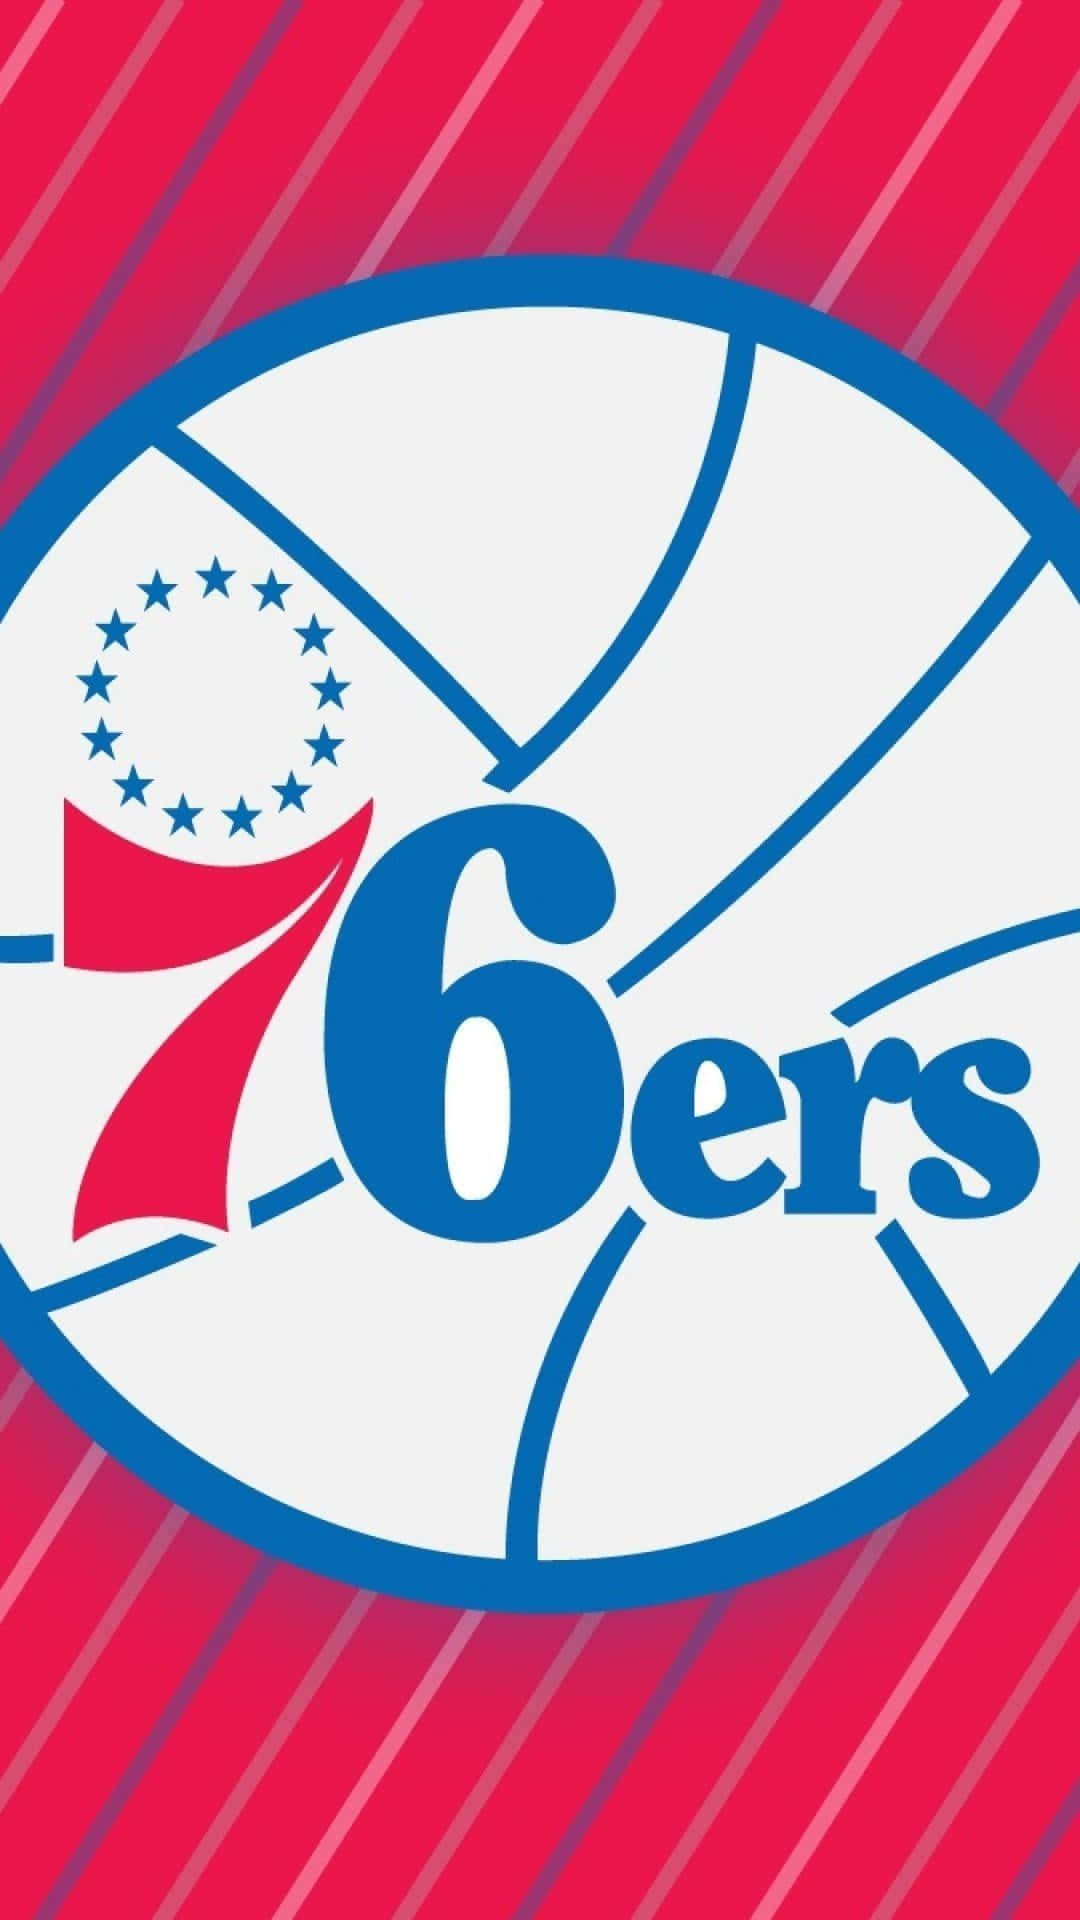 Display your sixers pride with this unique iphone case! Wallpaper